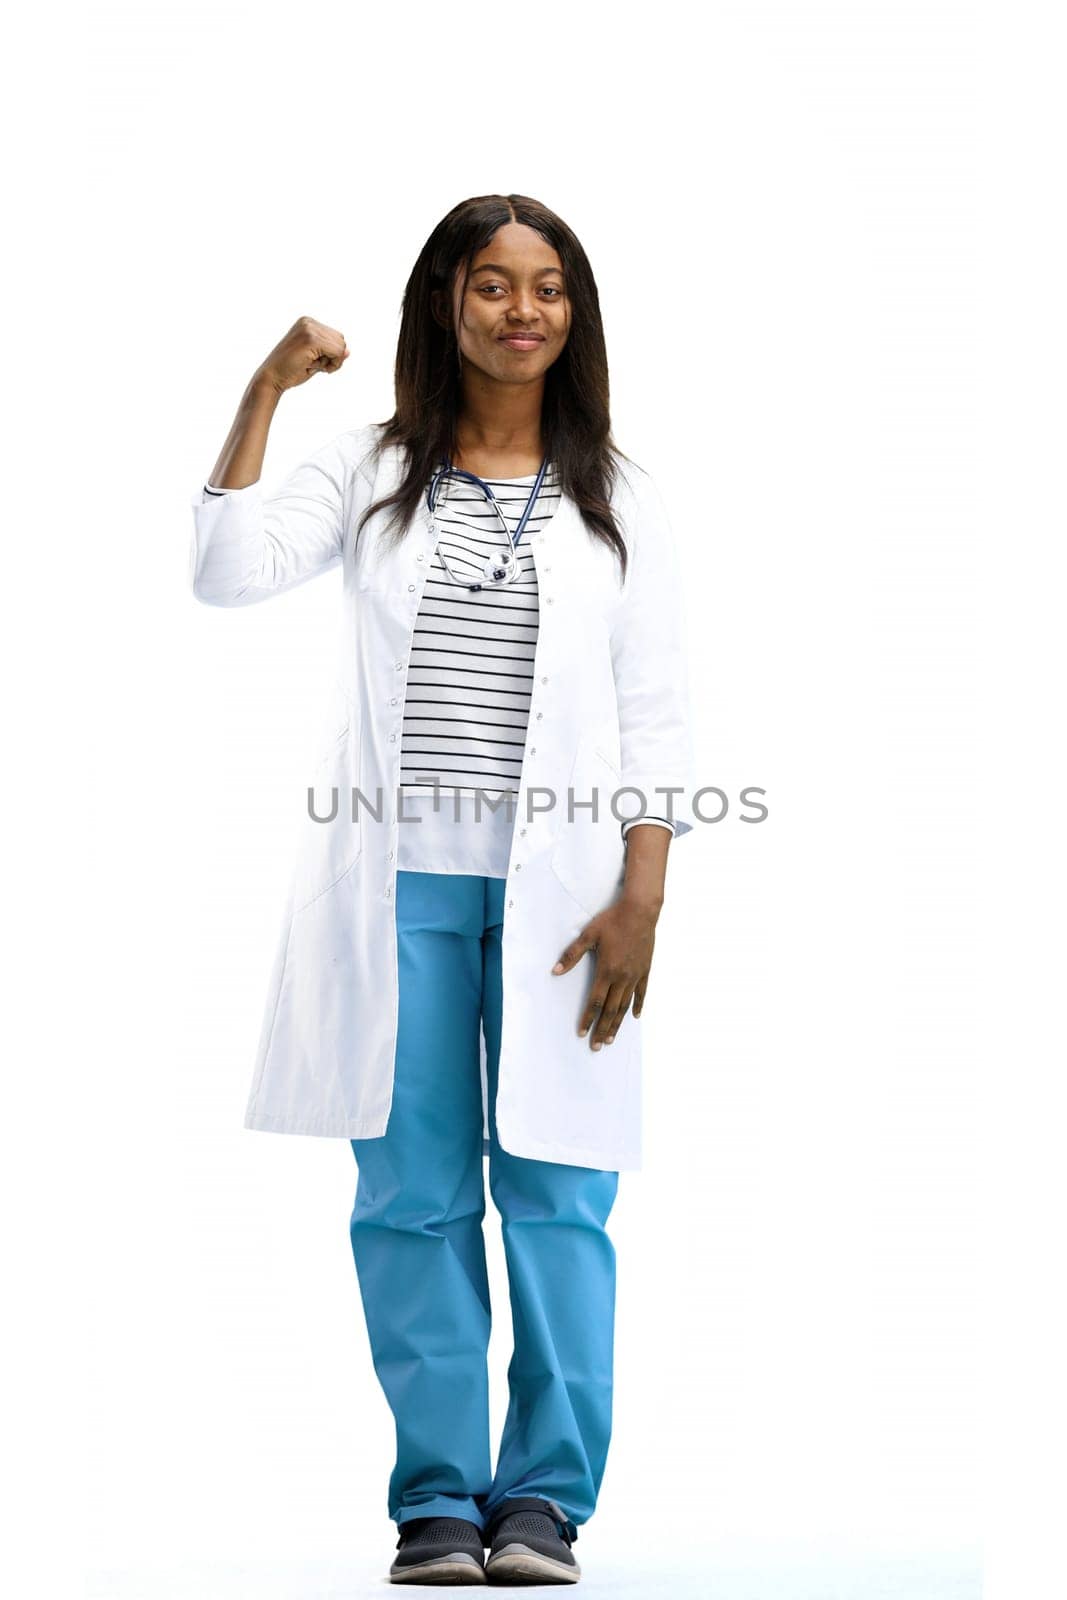 Female doctor, full-length, on a white background, shows strength.